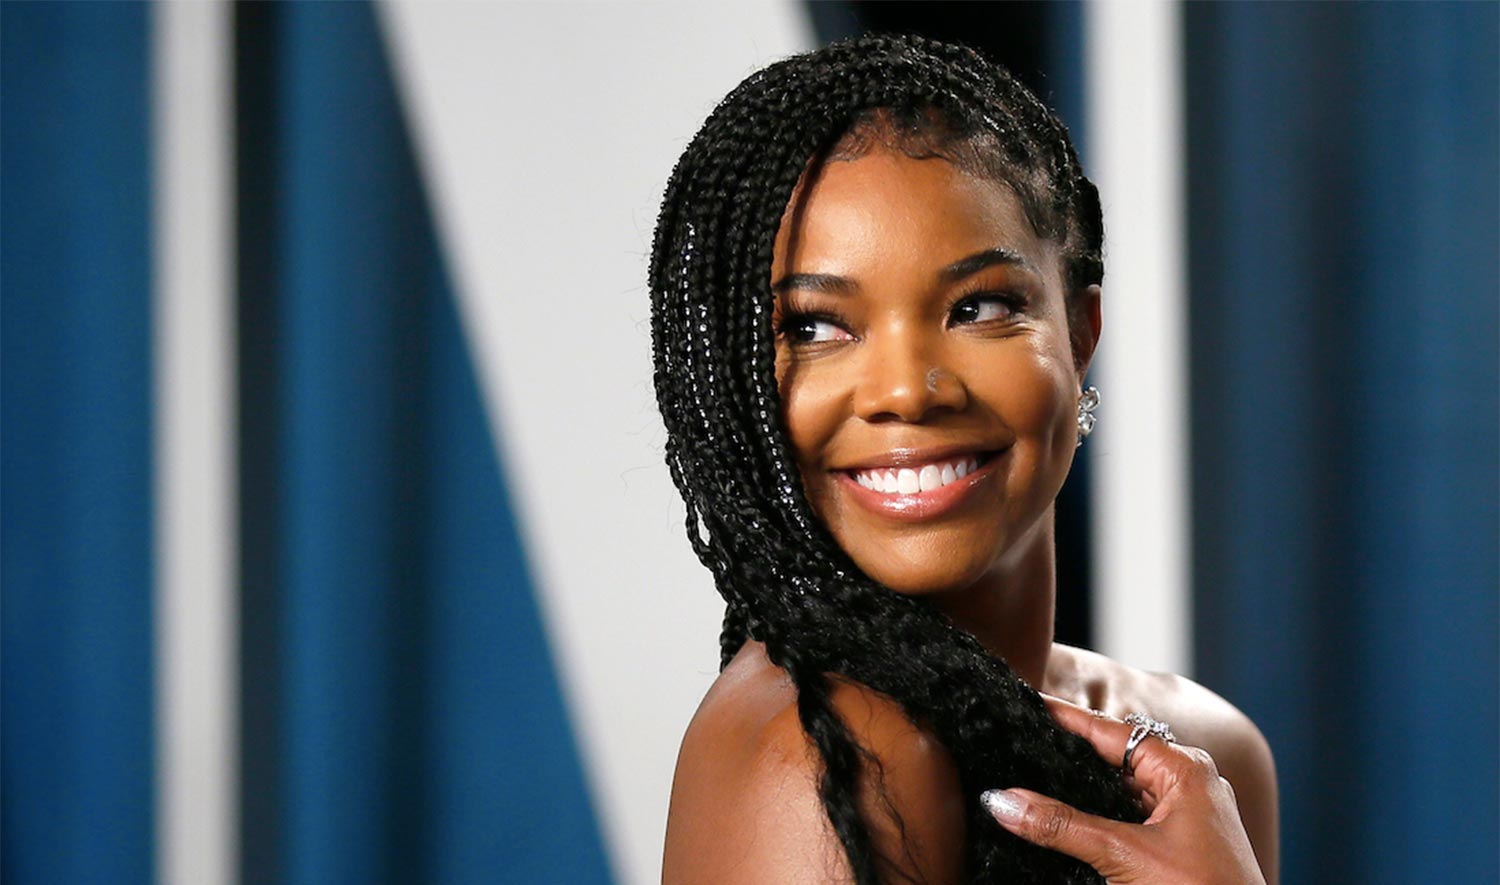 Gabrielle Union Says Her America’s Got Talent Exit ‘Process Was Really Brutal’ – article by People